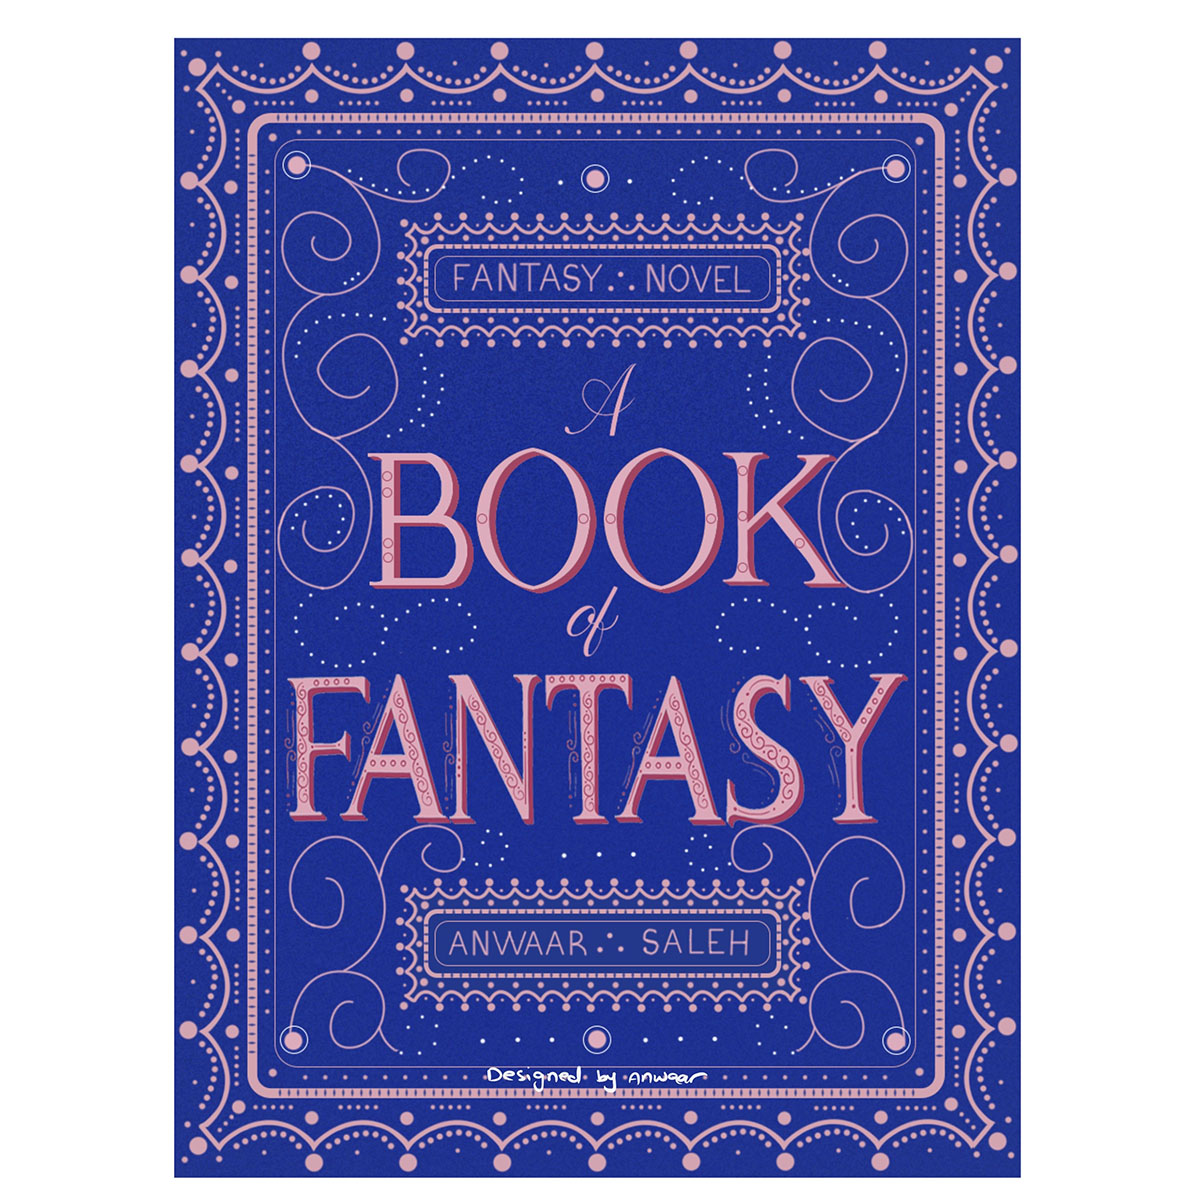 Book cover lettering